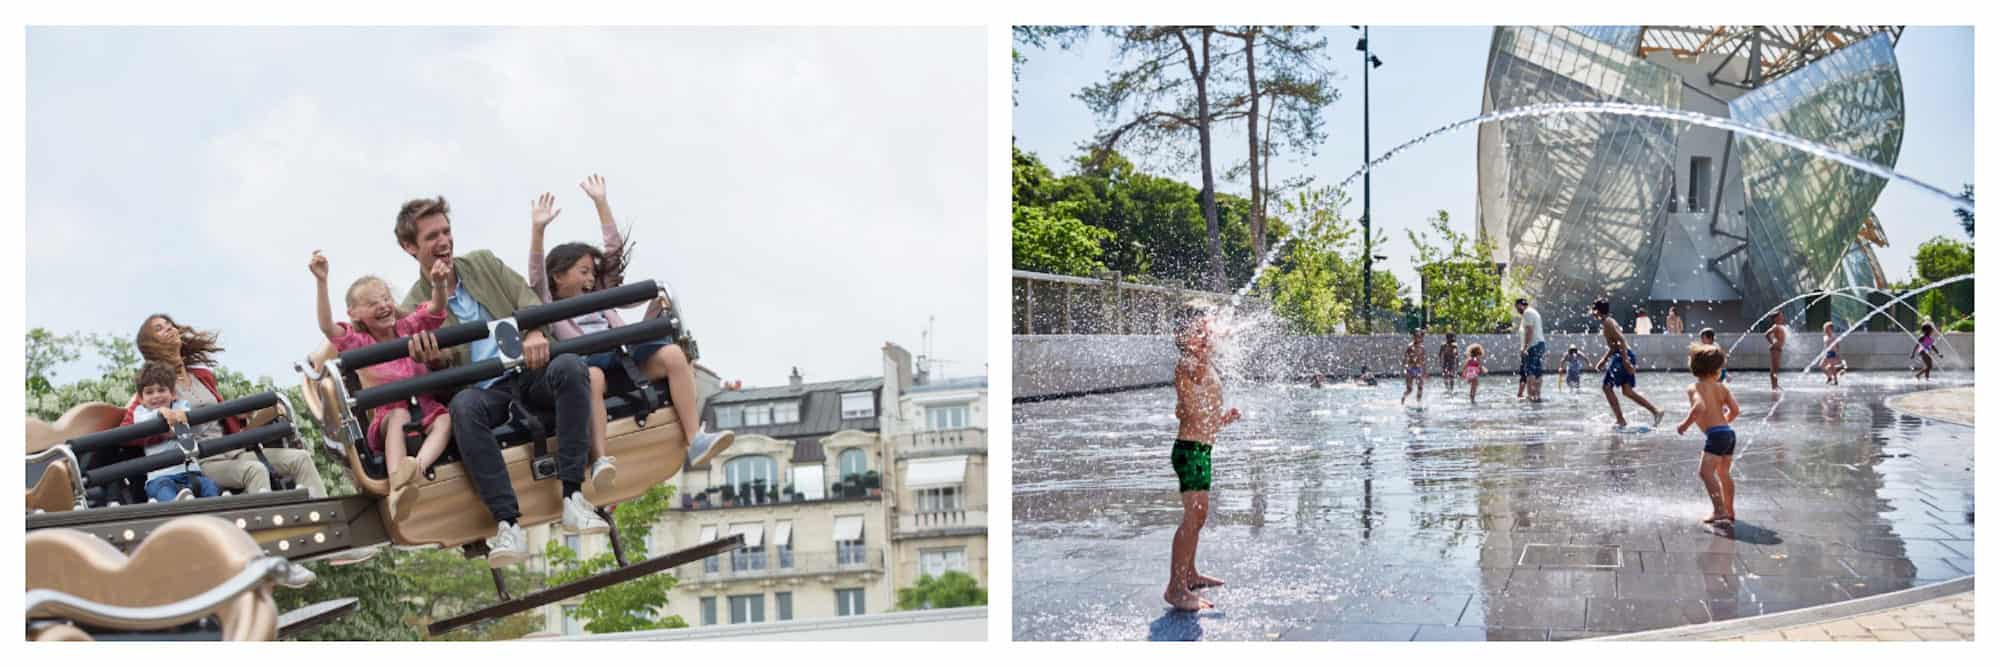 A father and his two kids having fun in kid-friendly Paris on a fair ground ride (left) and children in their bathing suits playing in the fountains outside the Louis Vuitton Foundation in the summer sun (right).